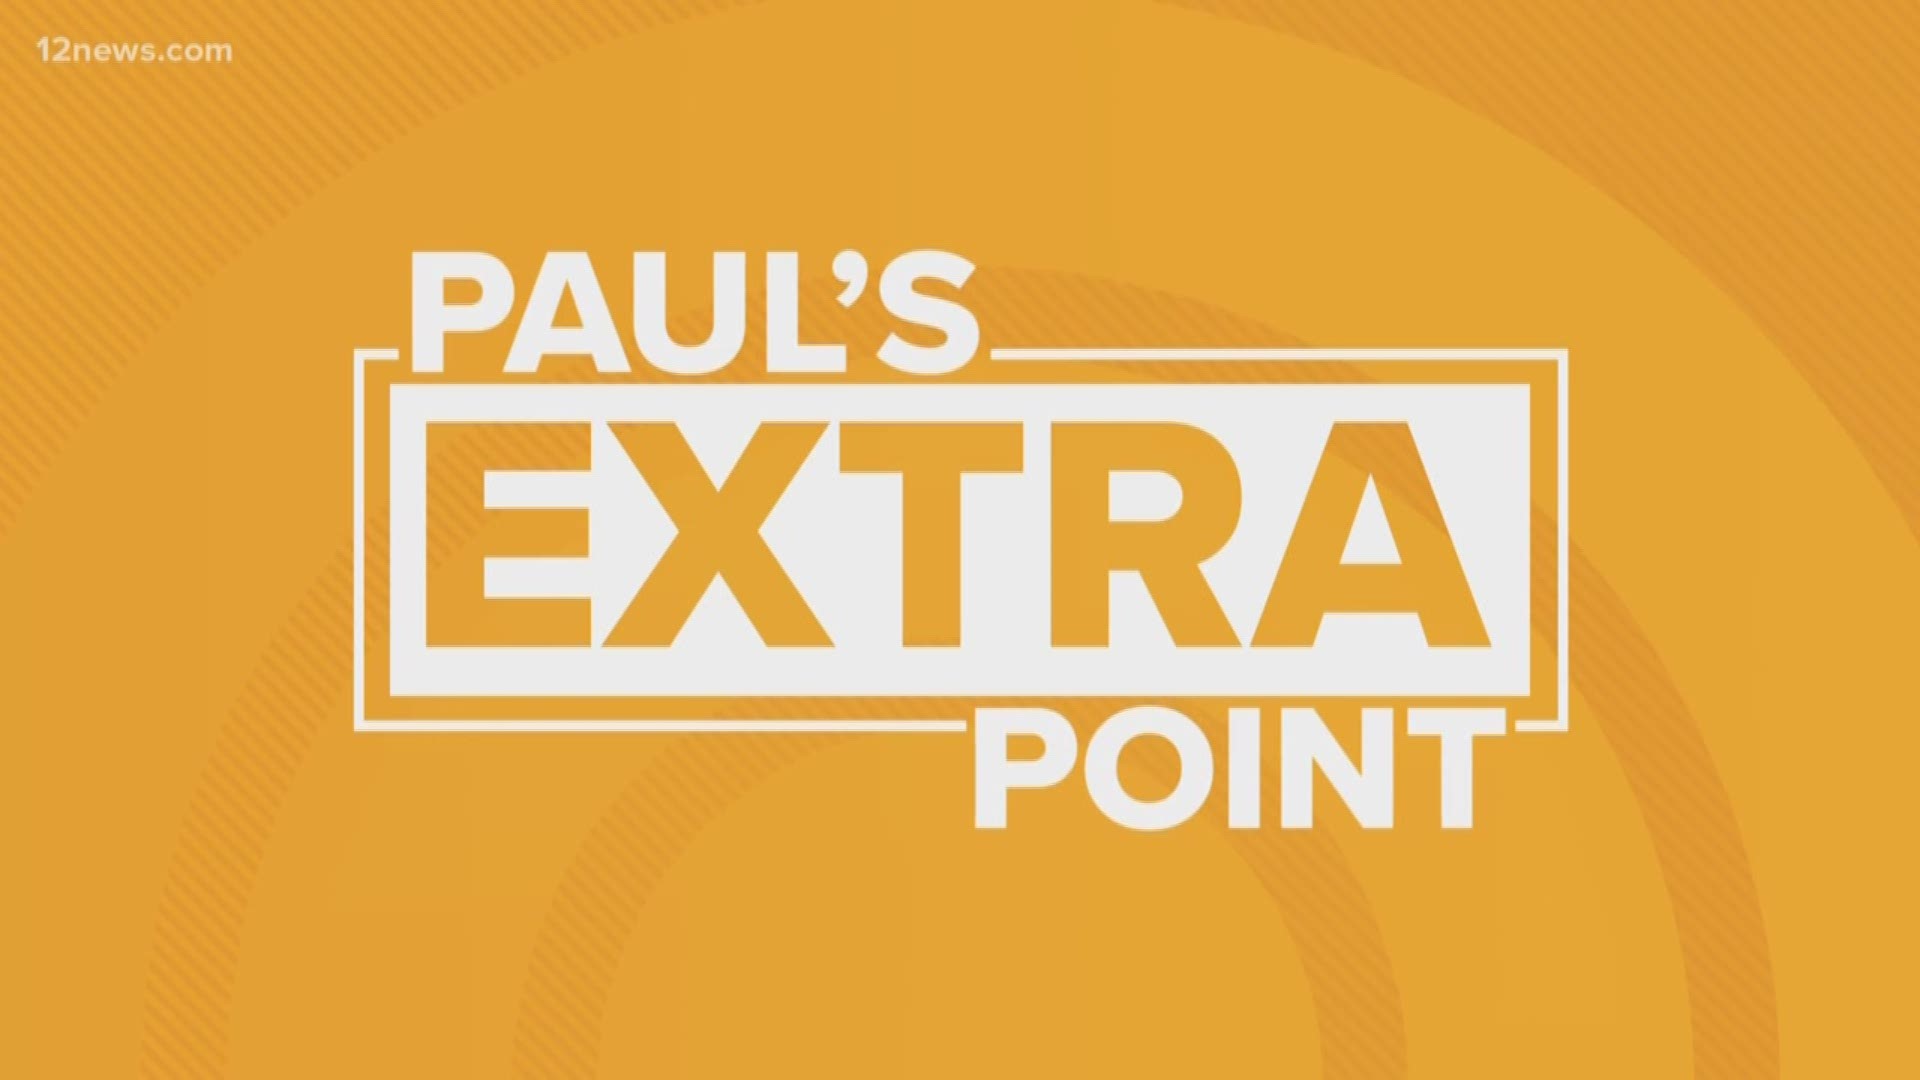 In this week's Extra Point, Paul Gerke talks about the rising costs of diabetes medications.